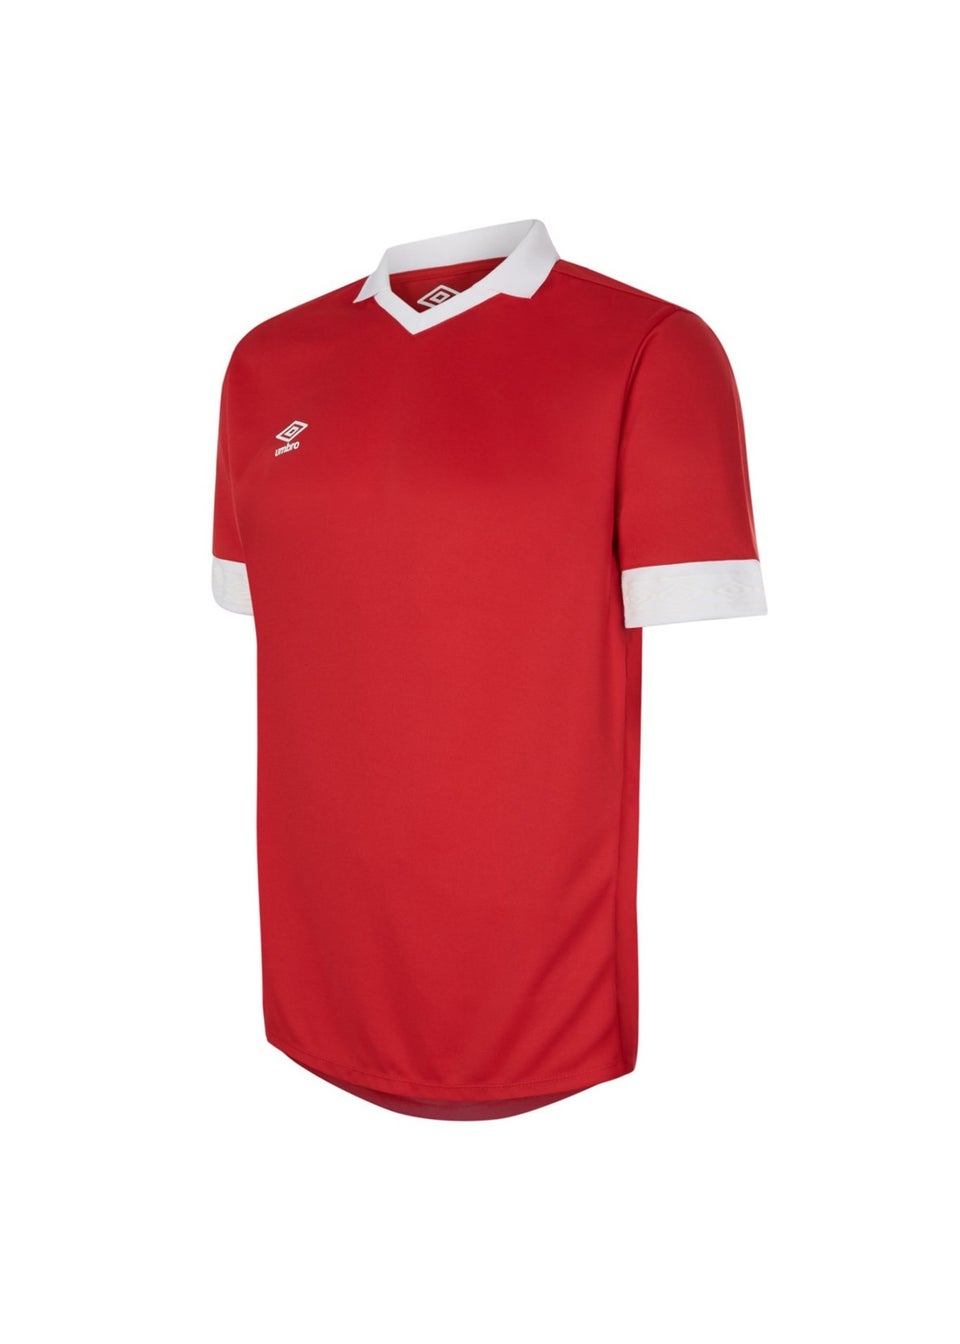 Umbro Red Tempest Jersey